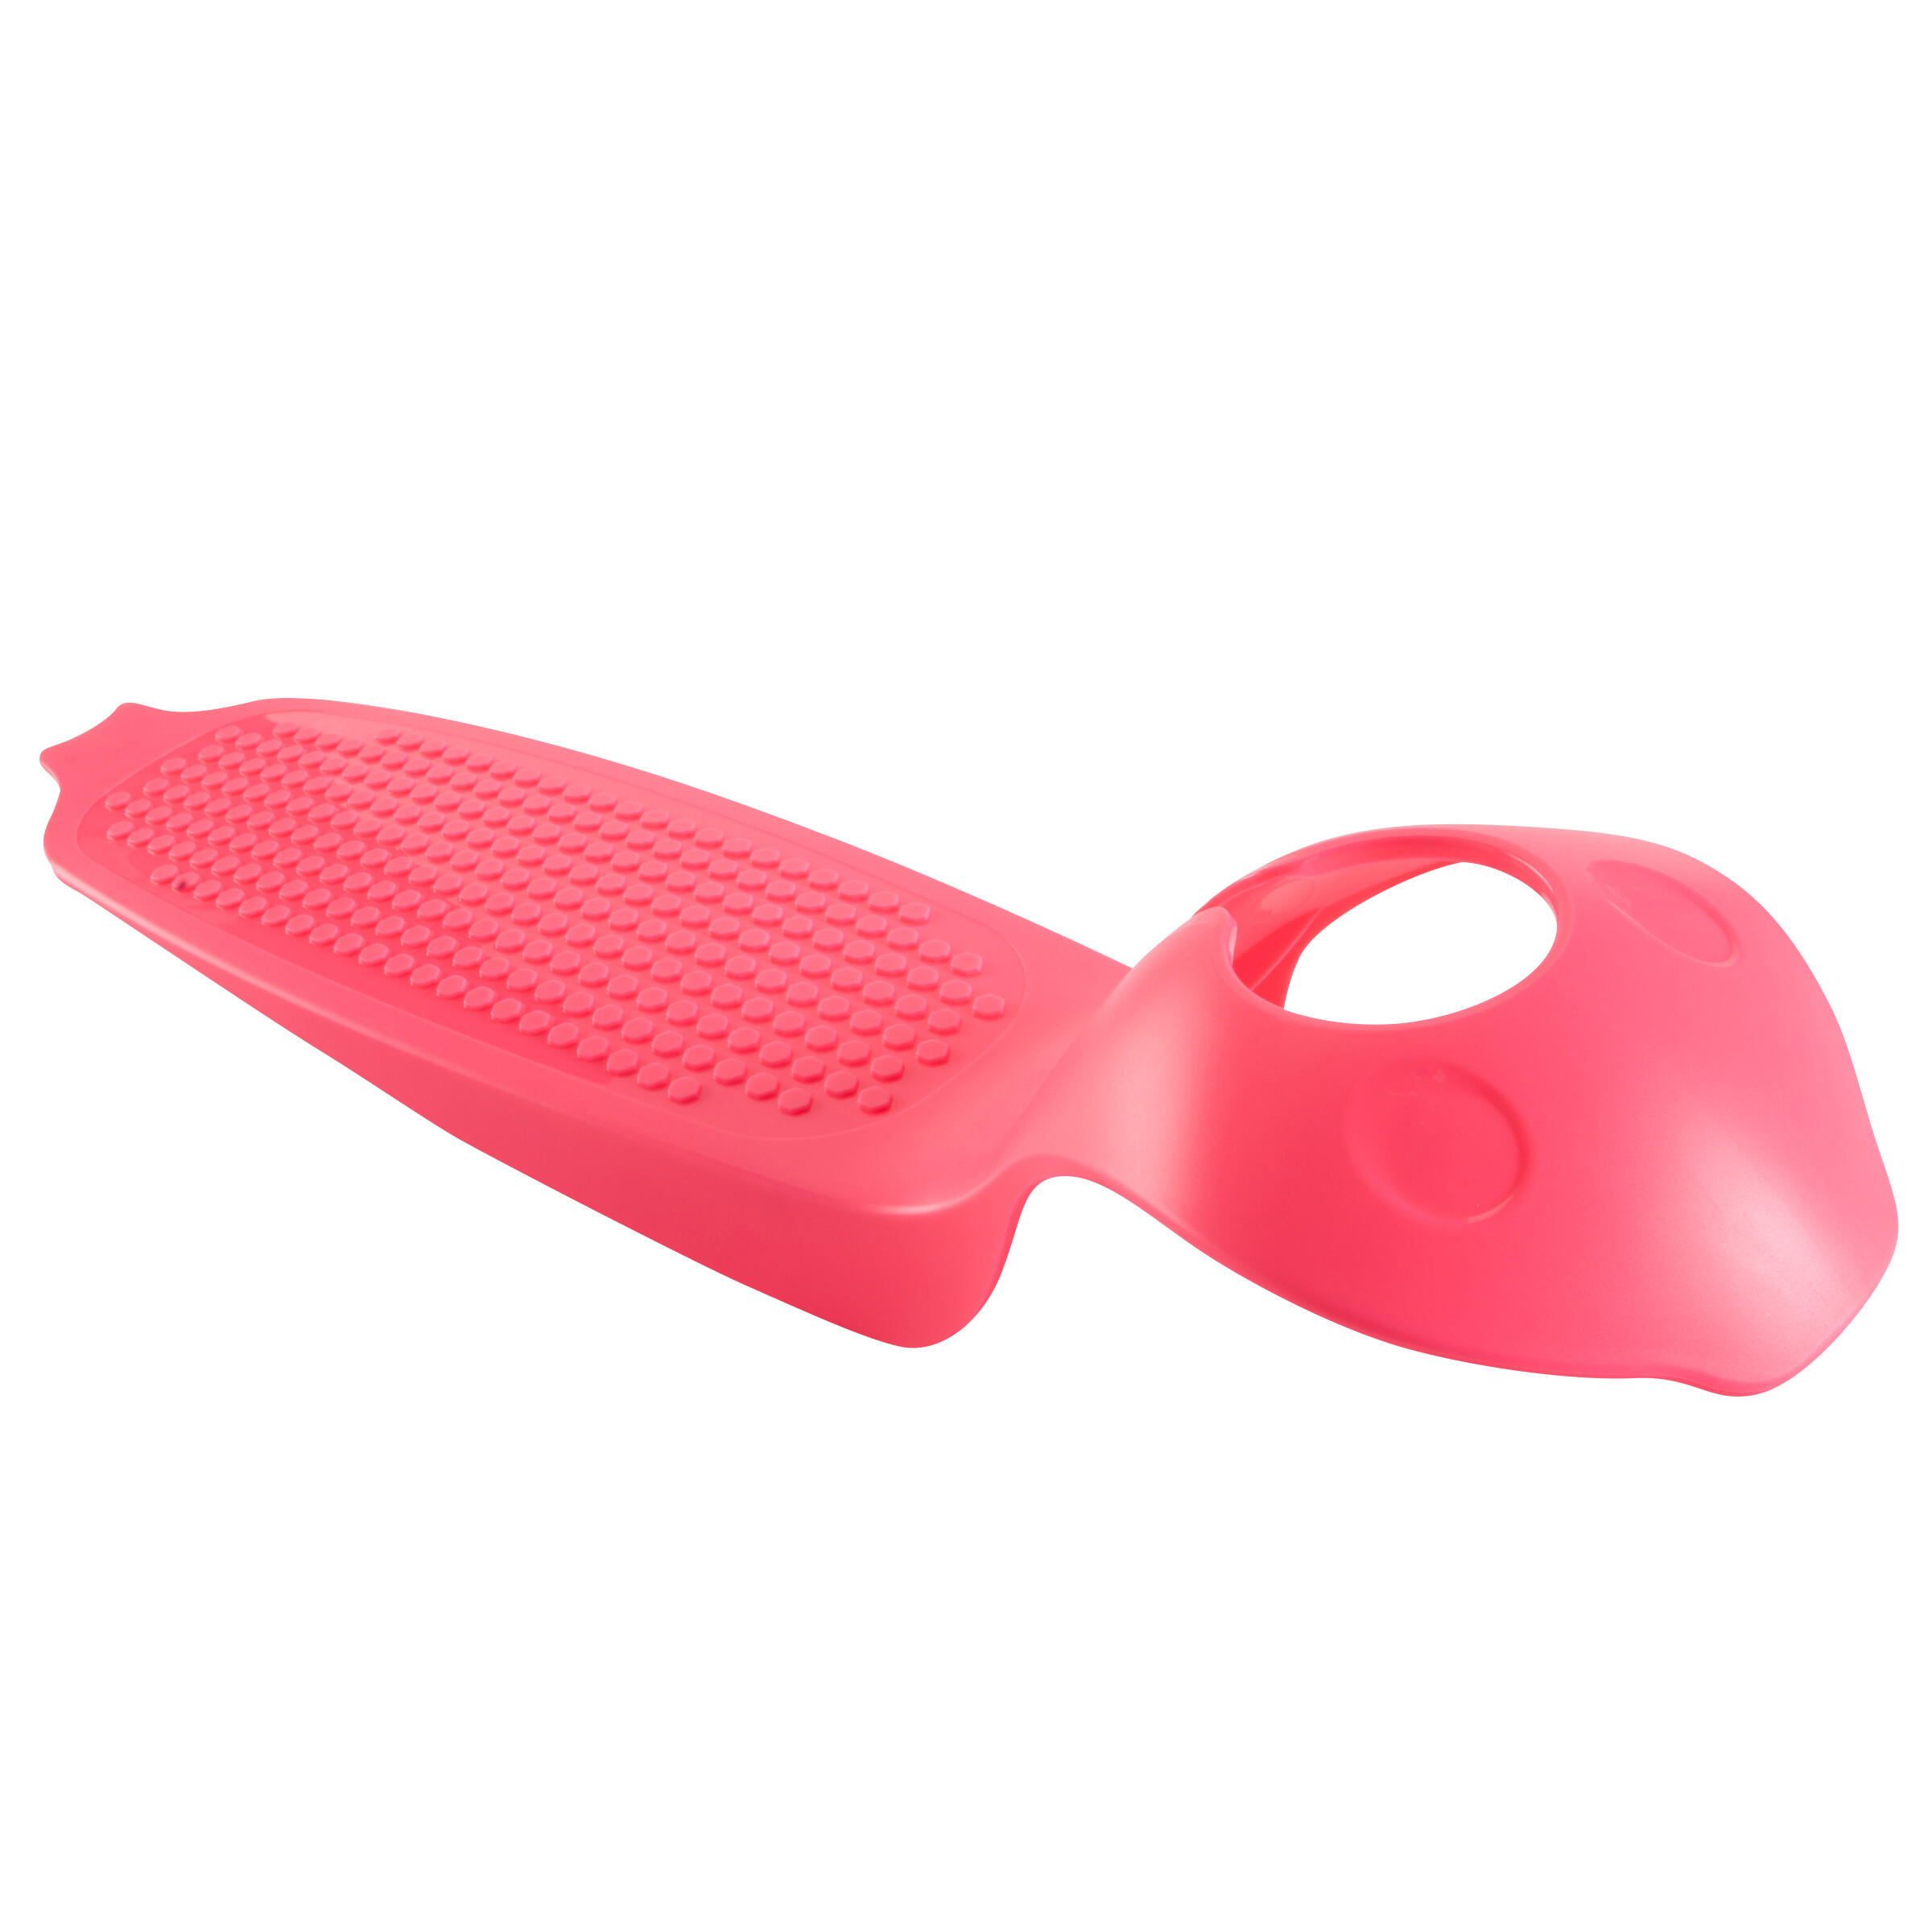 B1 Scooter Shell - Neon Pink 2/4